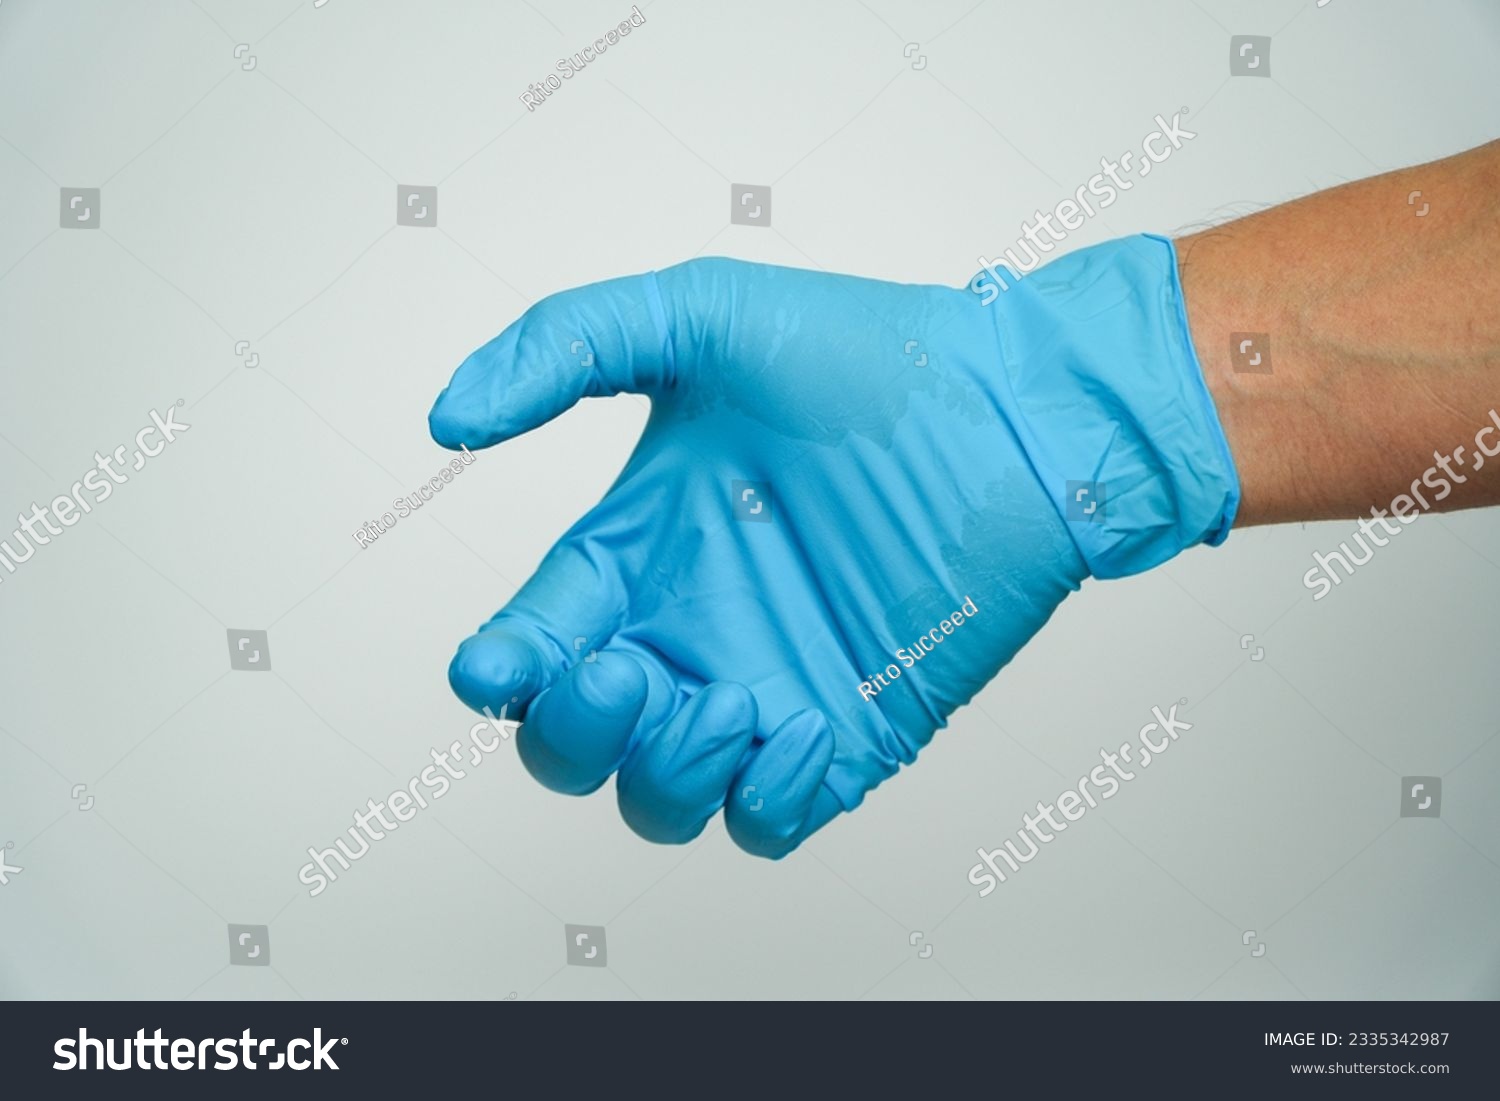 Person in blue latex gloves holding something against on a gray background,Hand in blue glove. #2335342987